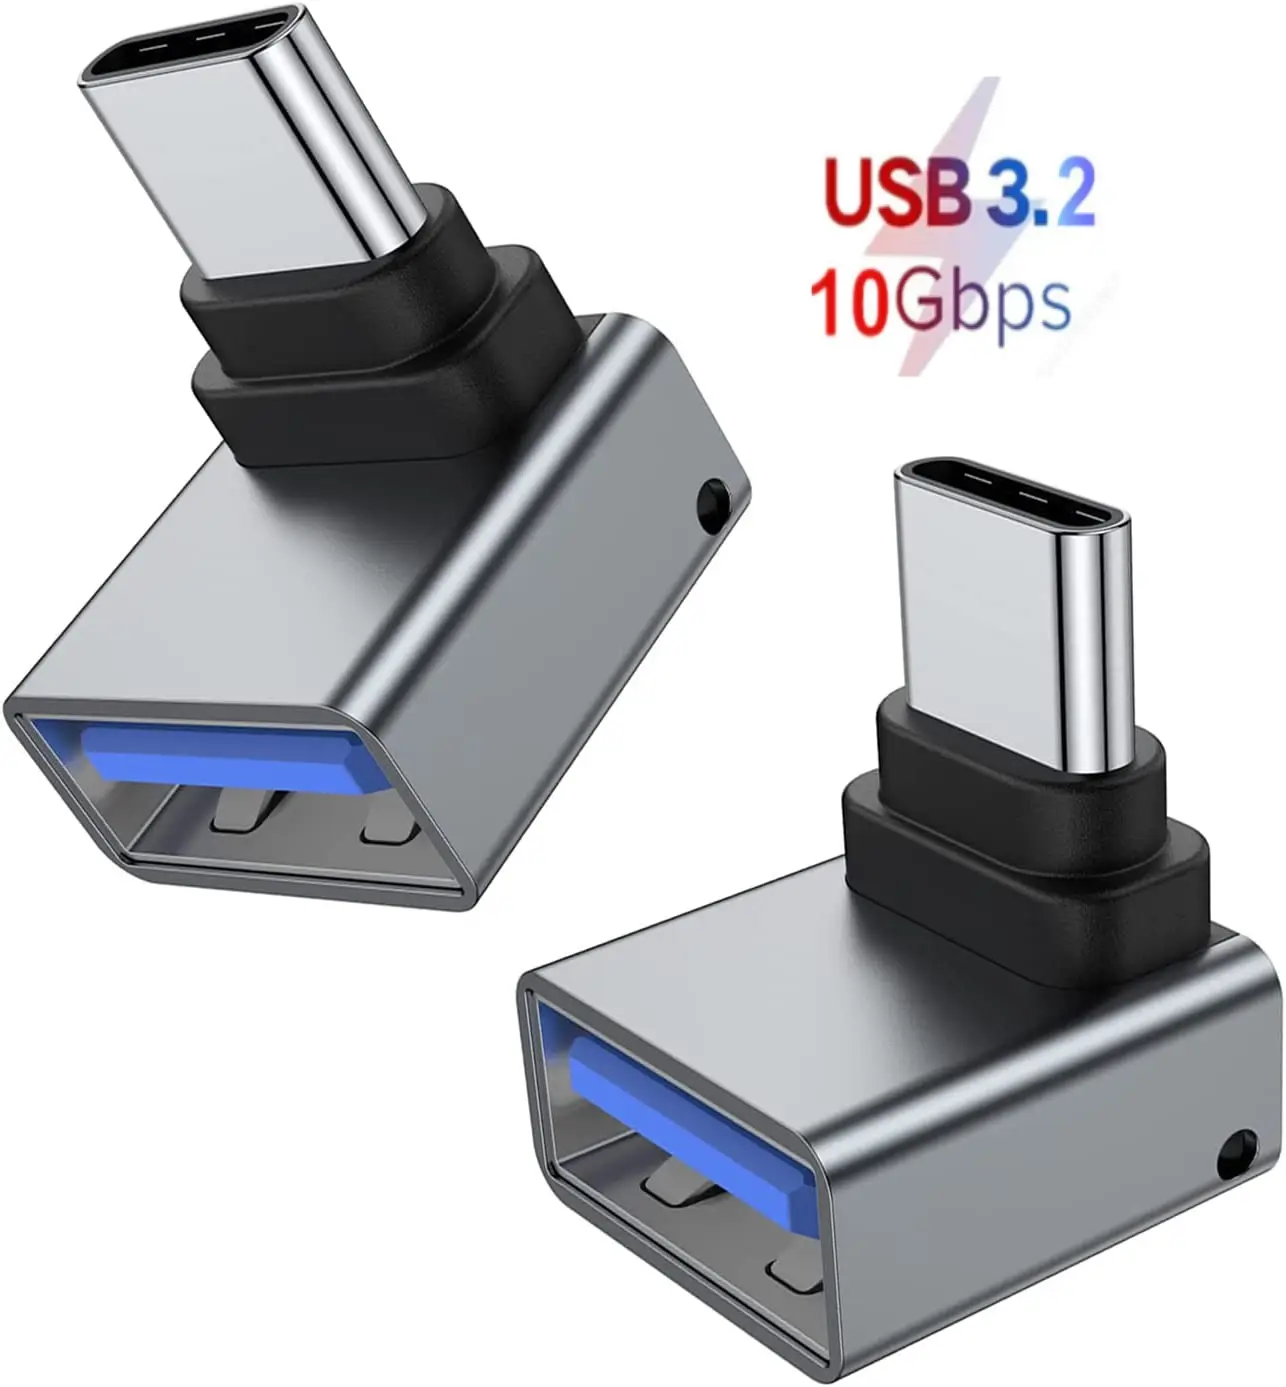 90 Degree Right Angle 10Gbps 3.2 USB Type C OTG Adapter for Macbook Xiaomi HUAWEI Samsung USB OTG Connector Phone Adapter